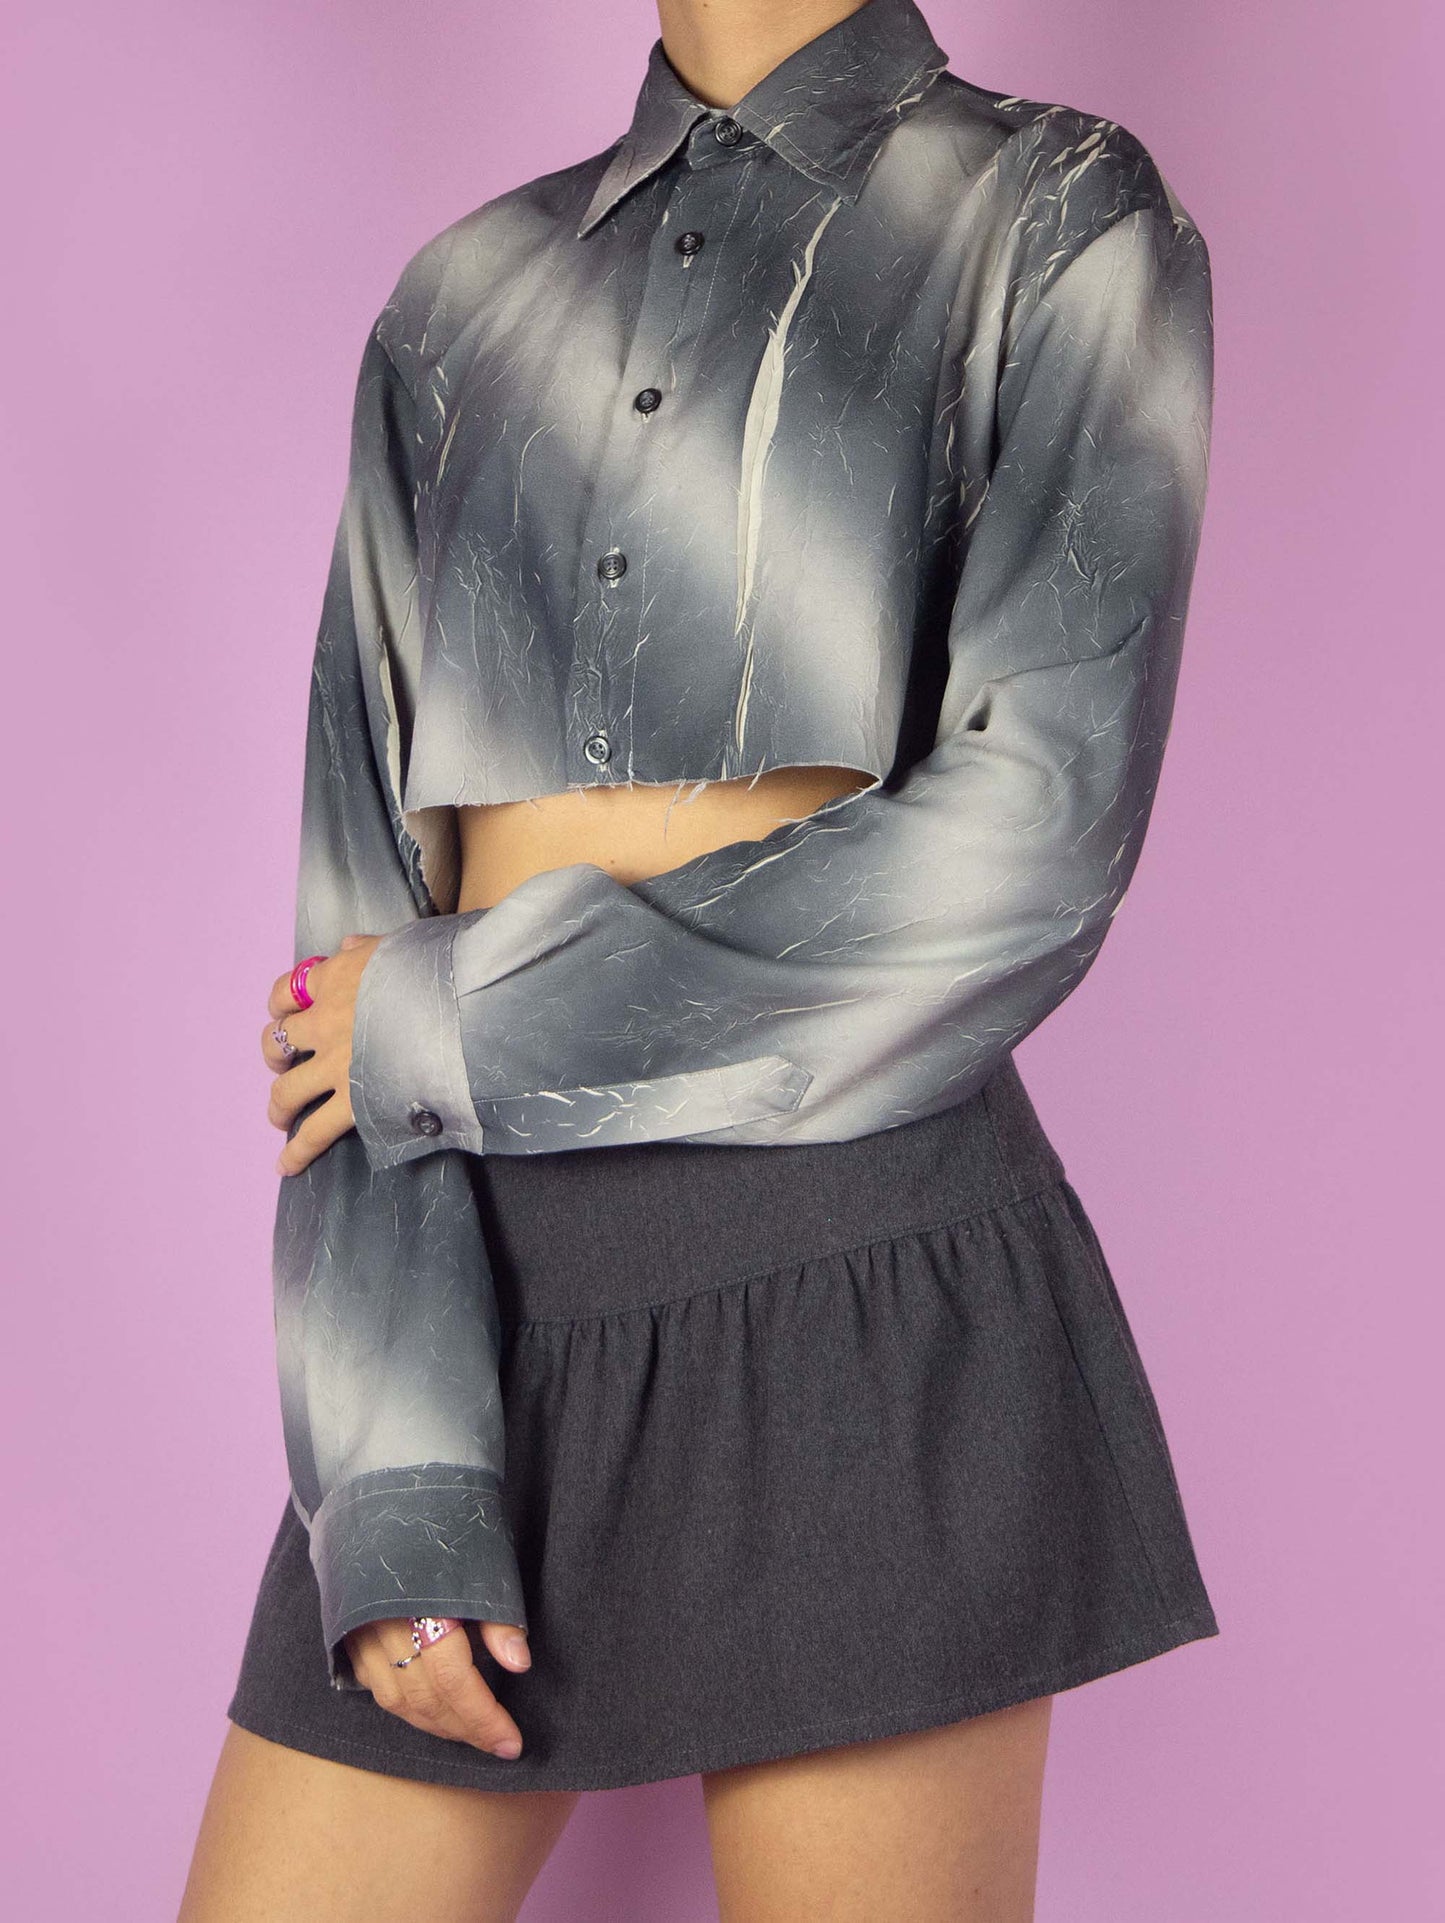 The Y2K Subversive Gray Cropped Shirt is a vintage blouse featuring a gray and beige tie-dye ombre print with a textured wrinkled effect, and it has a raw hem. Cyber deconstructed 2000s crop top.